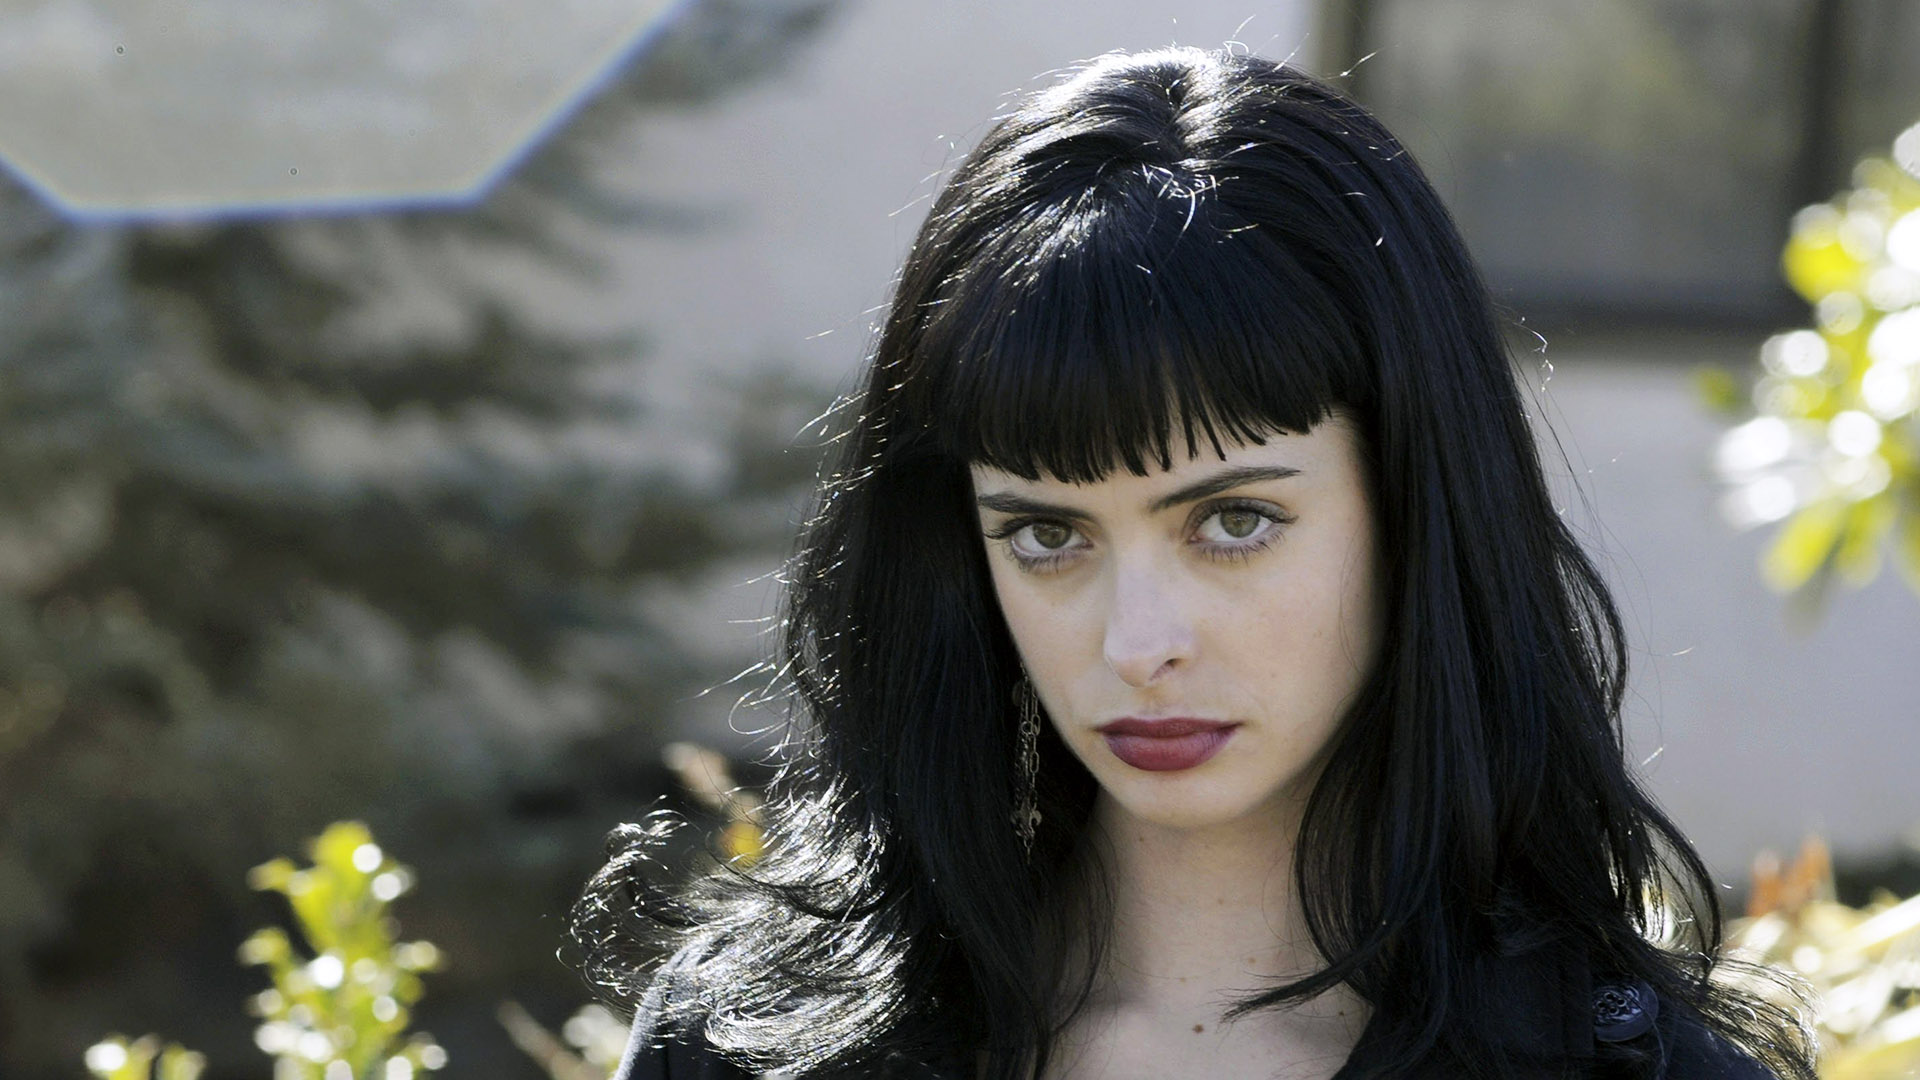 Krysten Ritter Says This Breaking Bad Scene was the 'Coolest Thing'